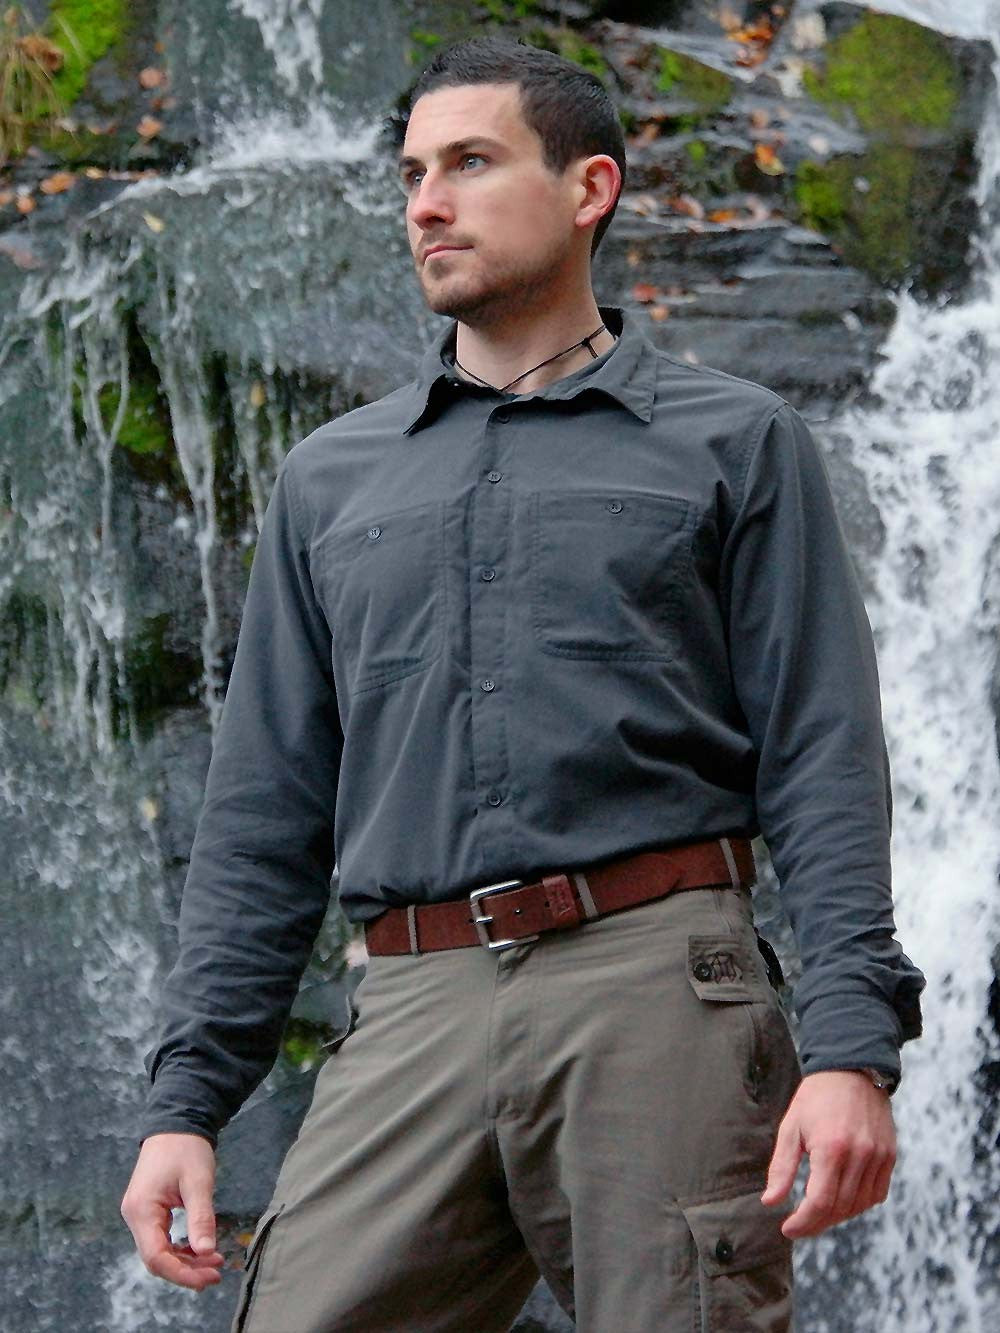 Pickpocket-Proof Travel Clothing with Hidden Pockets - Latitude 41